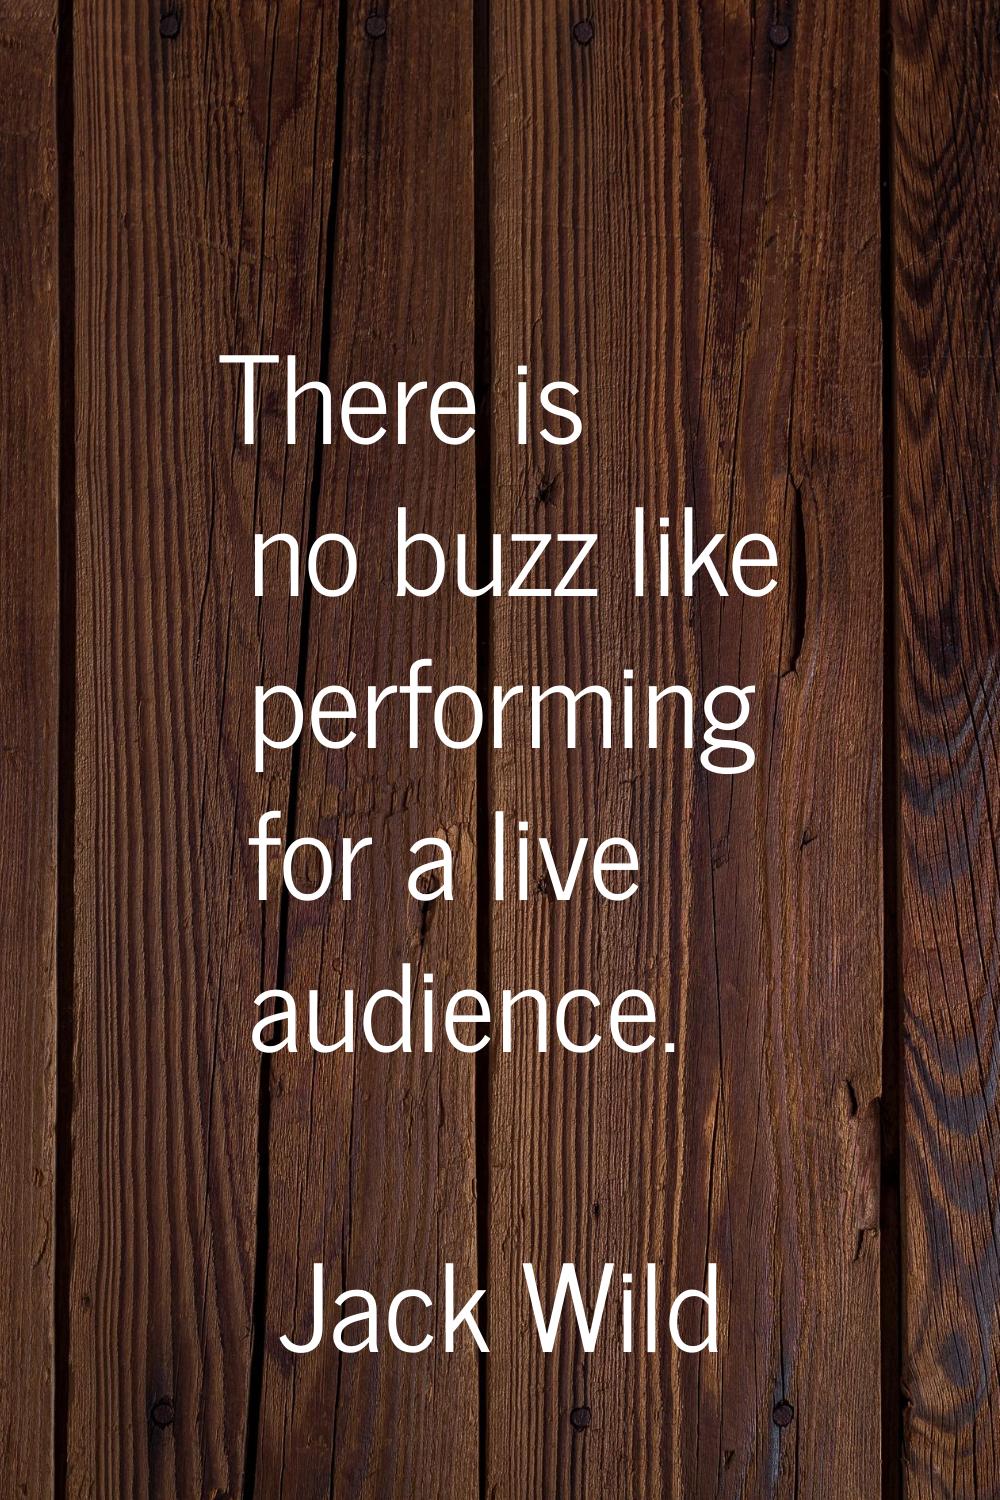 There is no buzz like performing for a live audience.